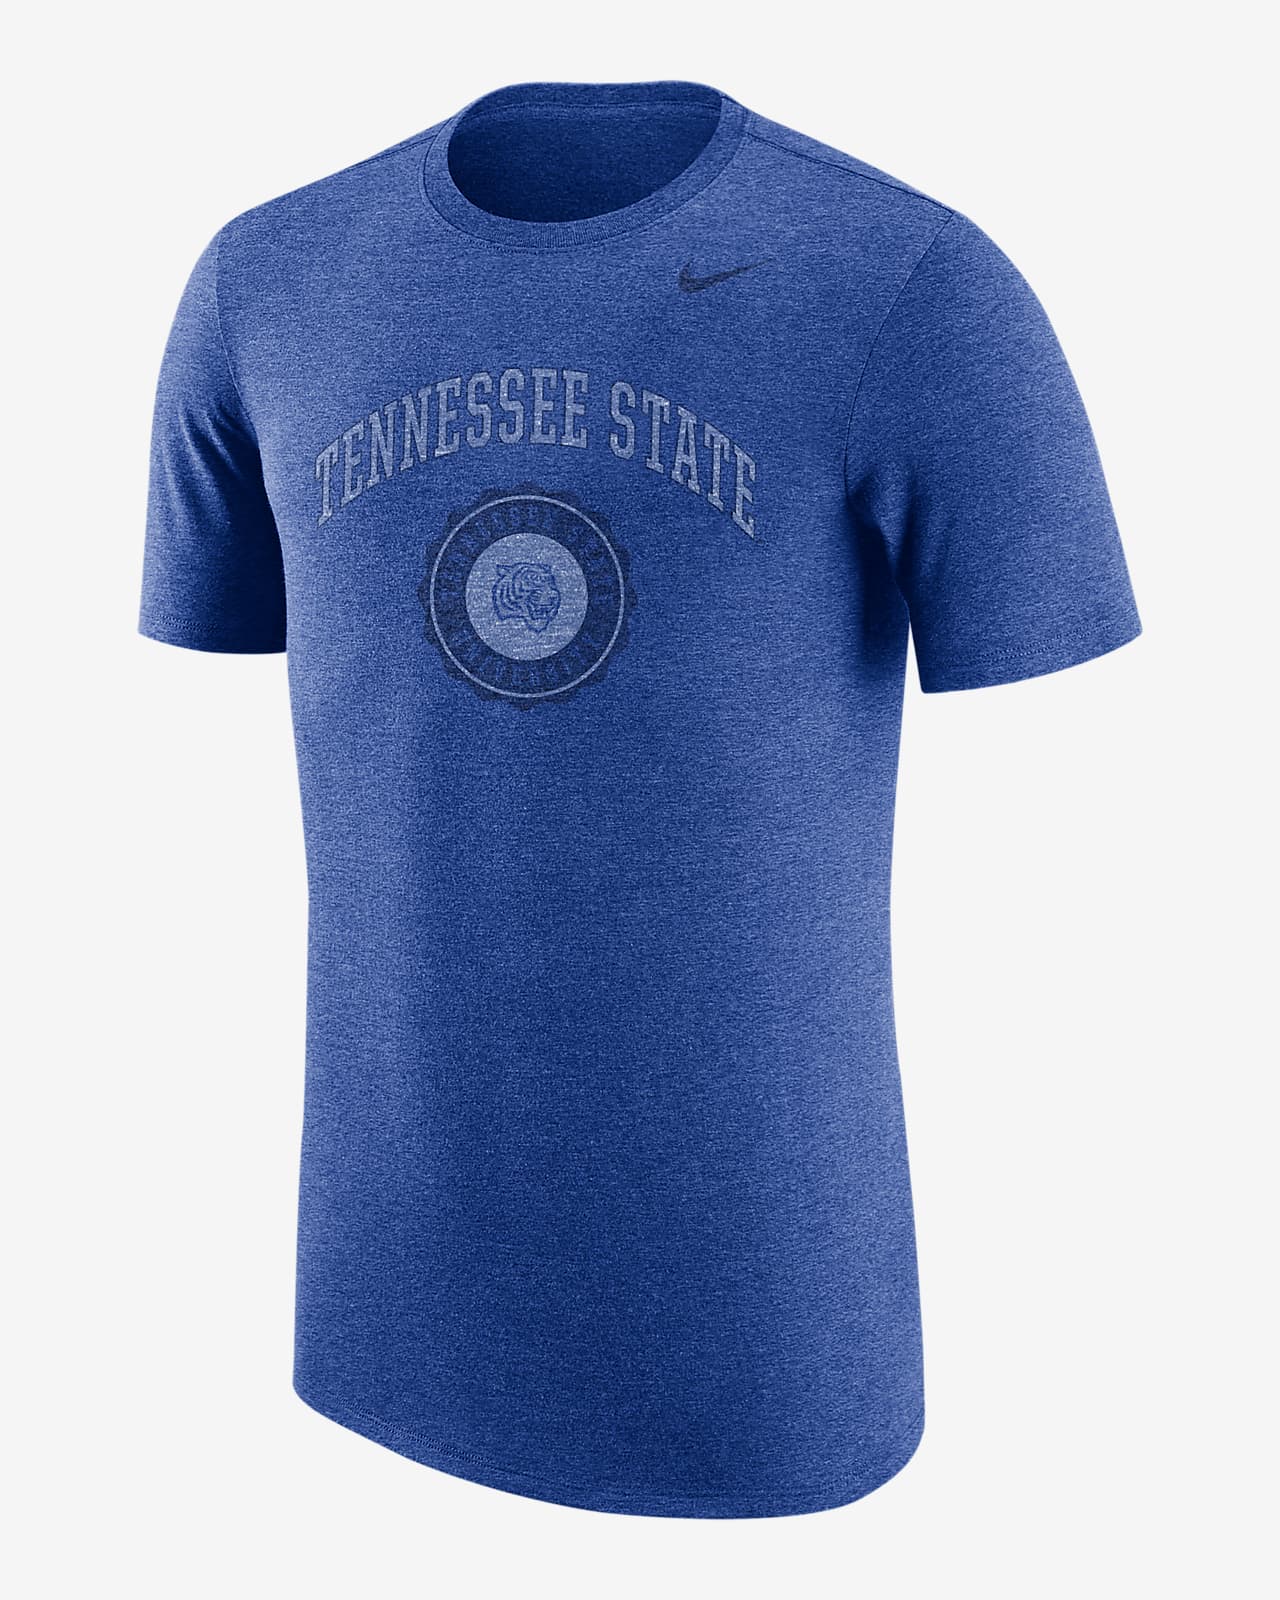 Playera para hombre Nike College (Tennessee State)